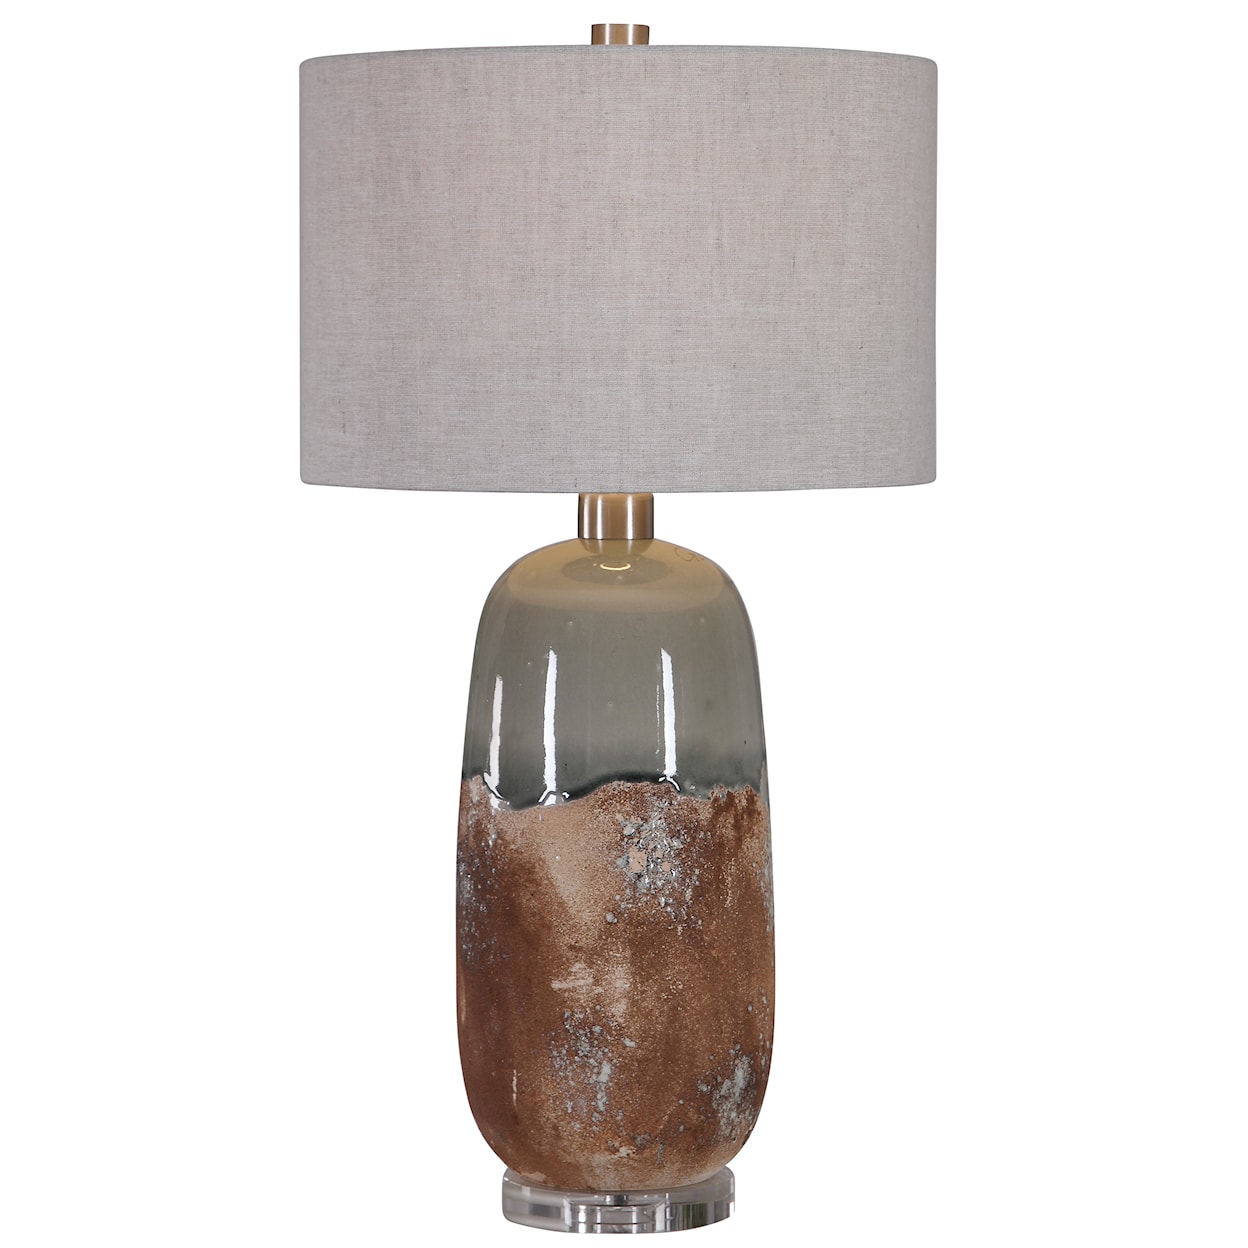 Uttermost Table Lamps Maggie Ceramic Table Lamp